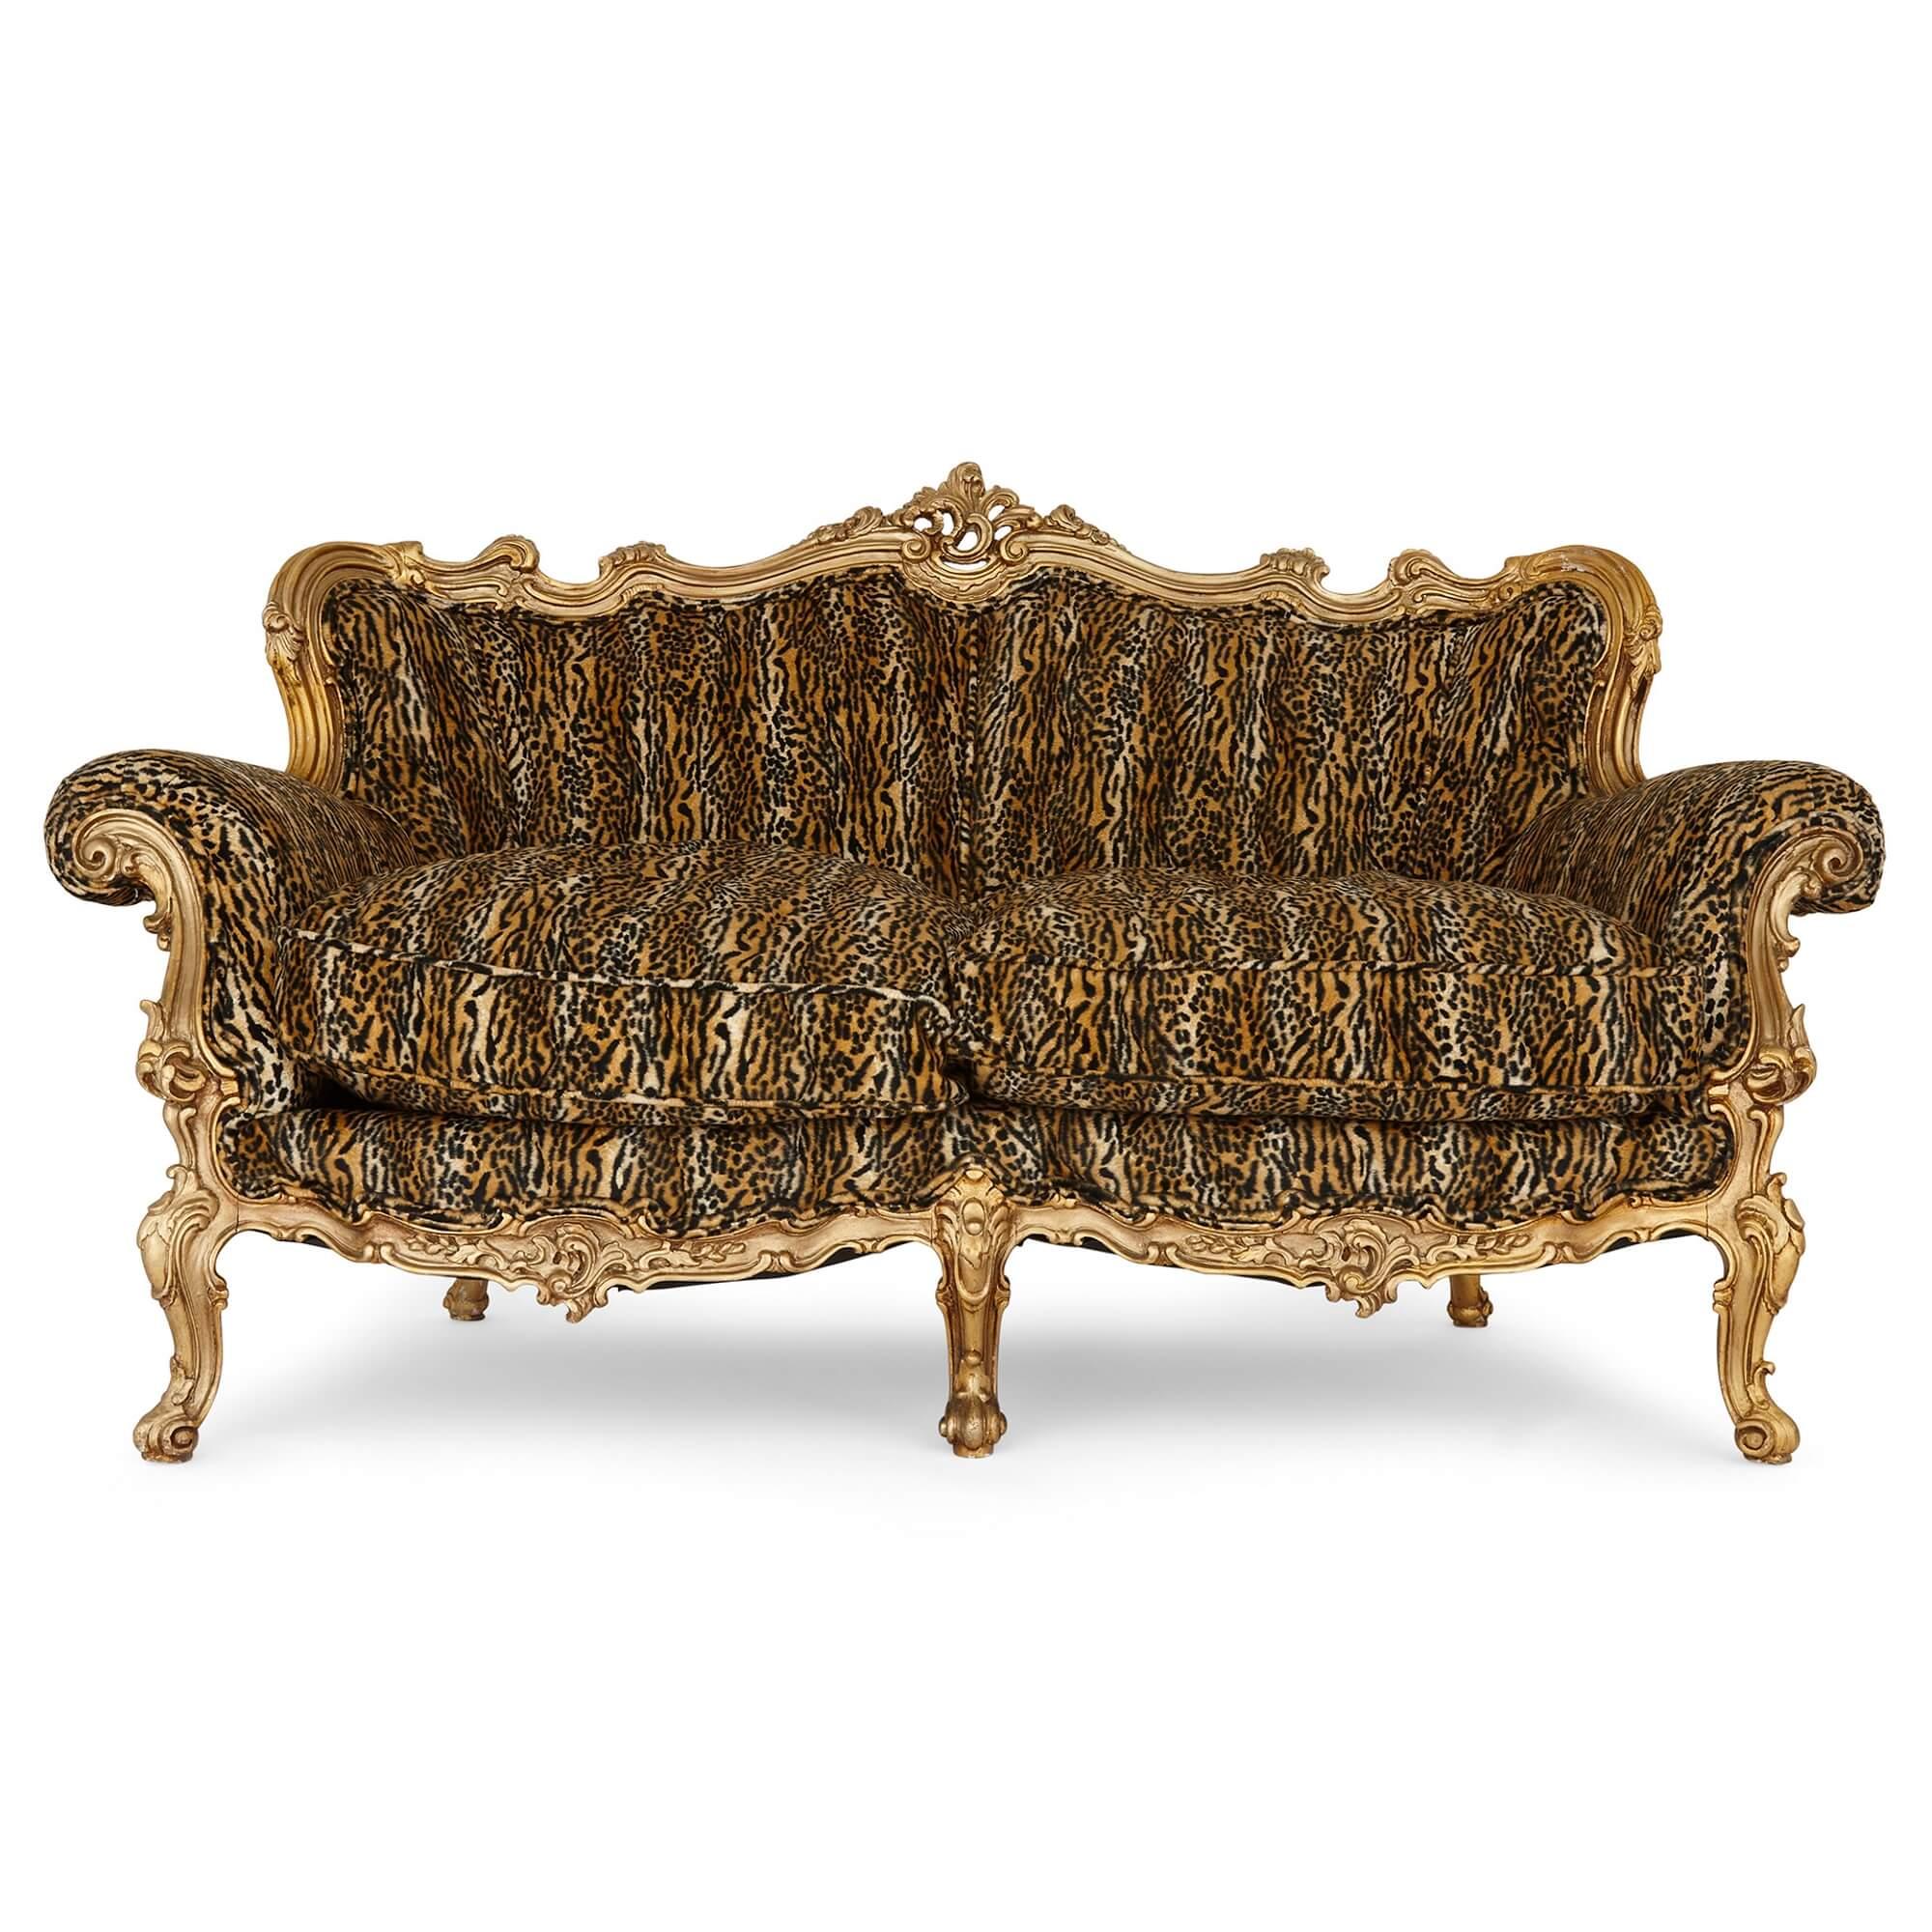 Pair of large ornate giltwood antique sofas.
French, early 20th century.
Measures: Height 100cm, width 148cm, depth 75cm.

Upholstered with leopard skin, these remarkably lavish, luxurious, and ornate sofas are crafted from giltwood, and were